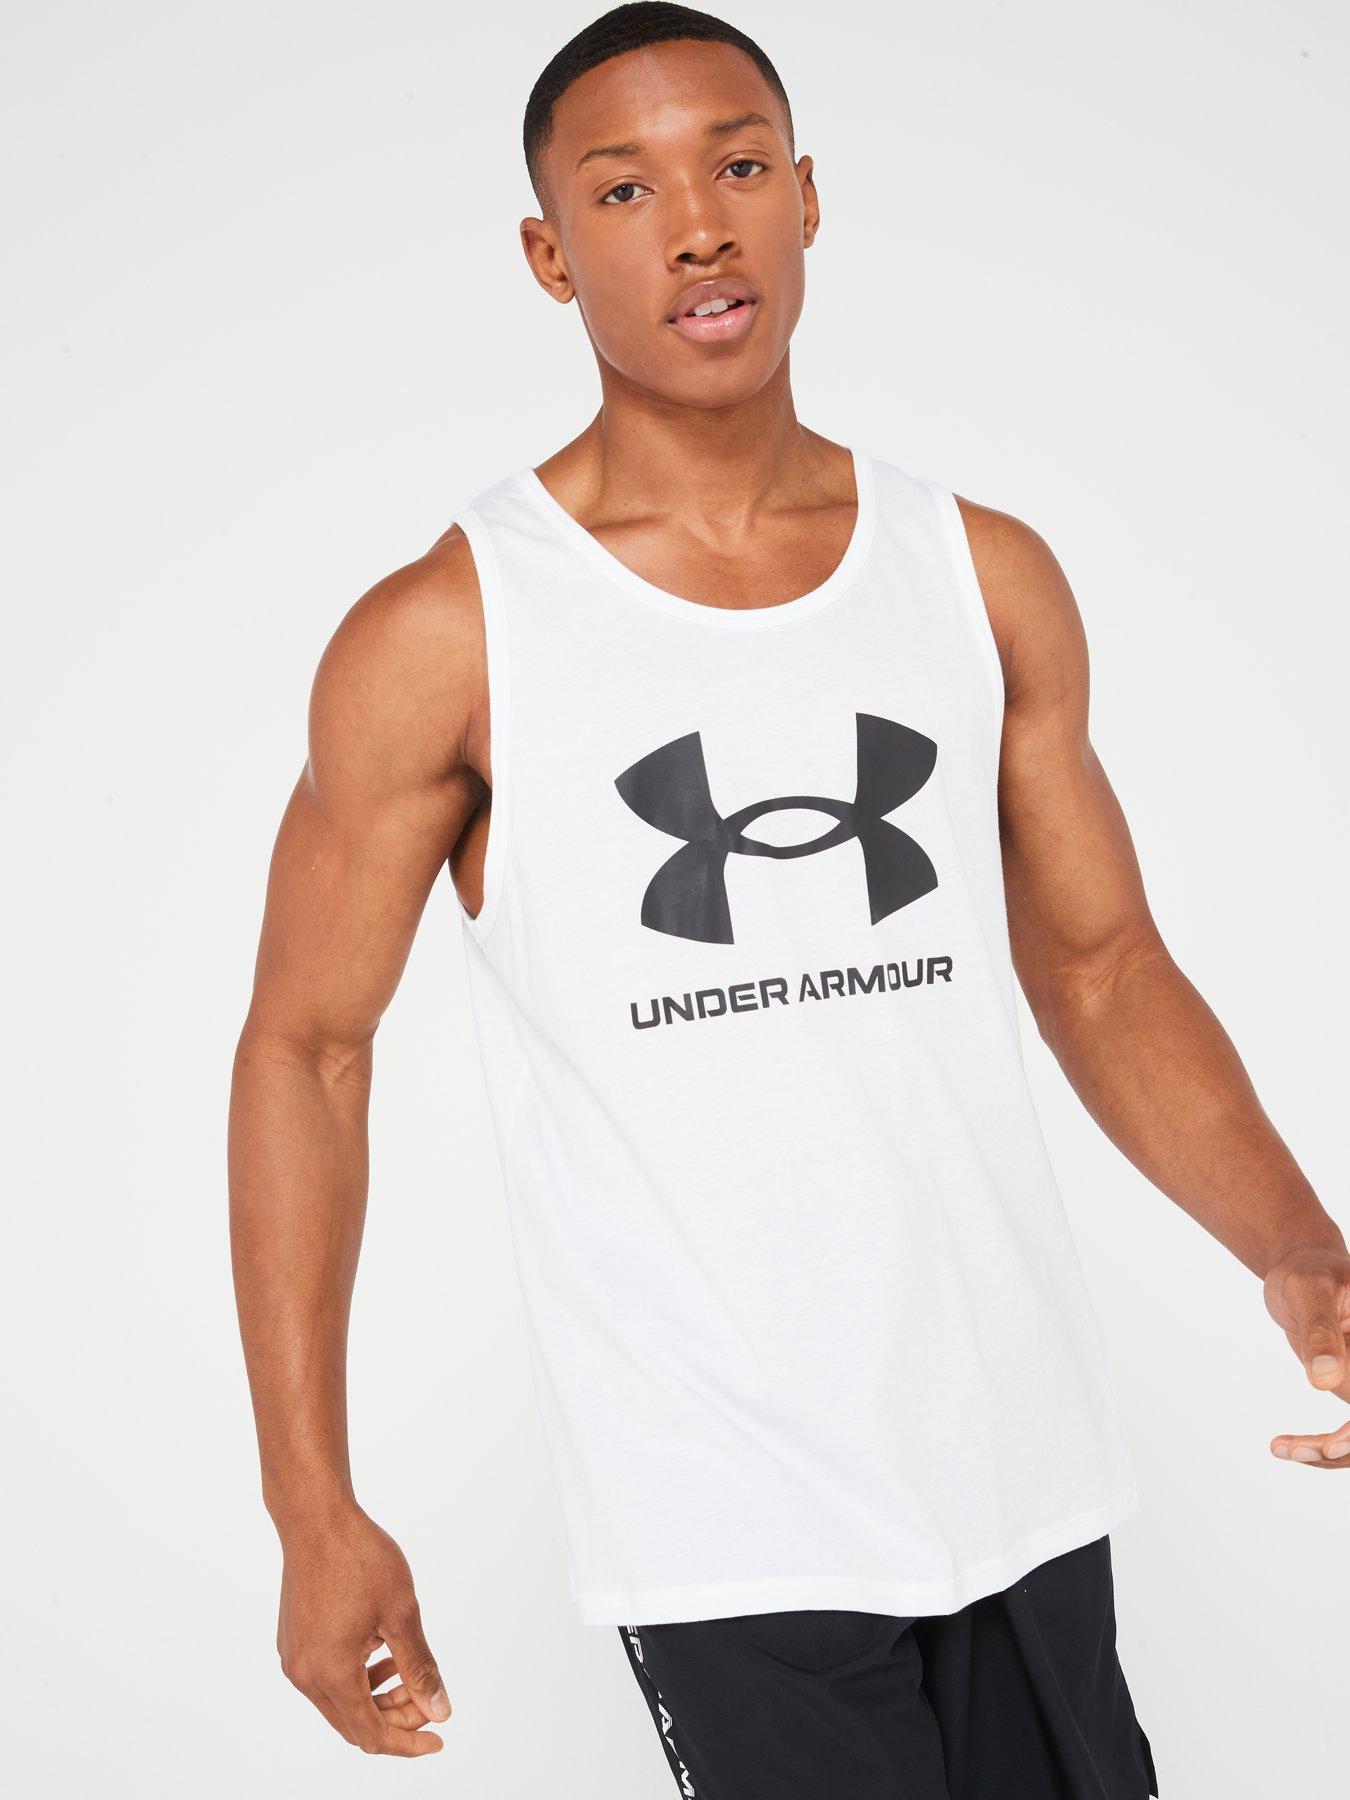 Under Armour Men's Sonic Fitted Sleeveless Tank Top